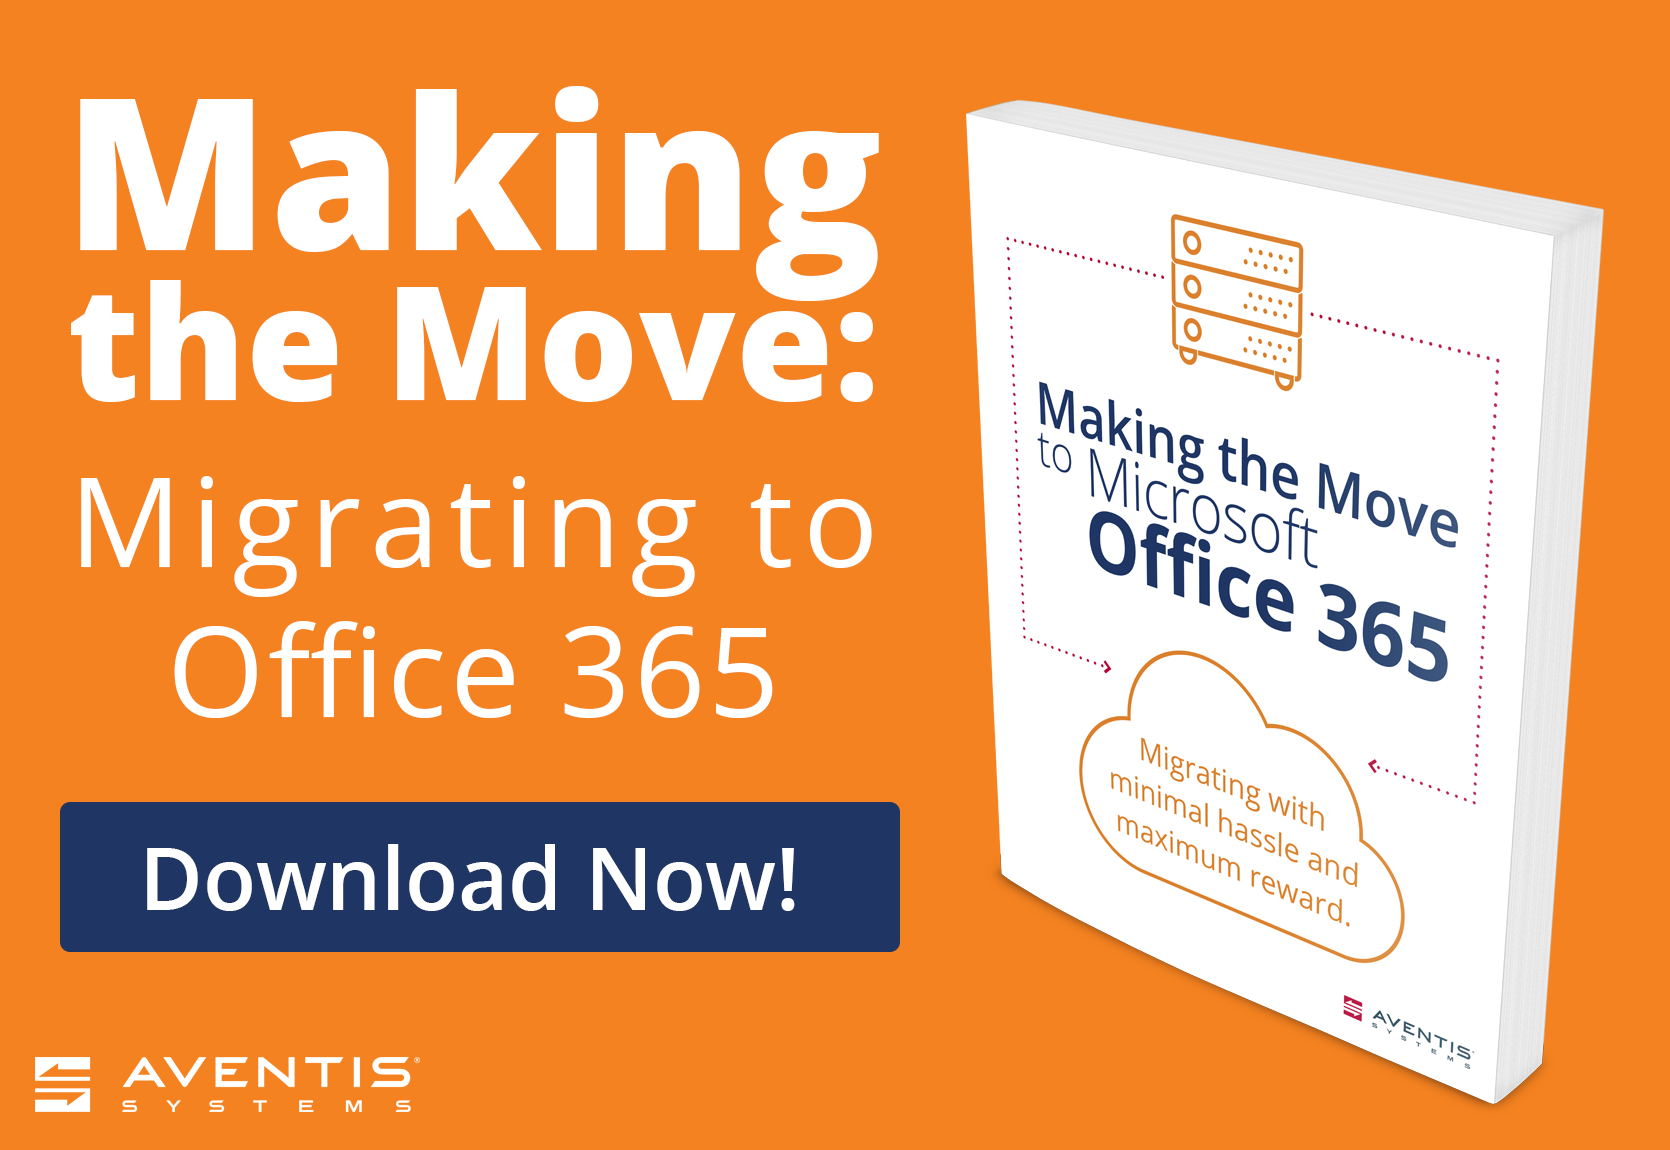 Making the Move to O365